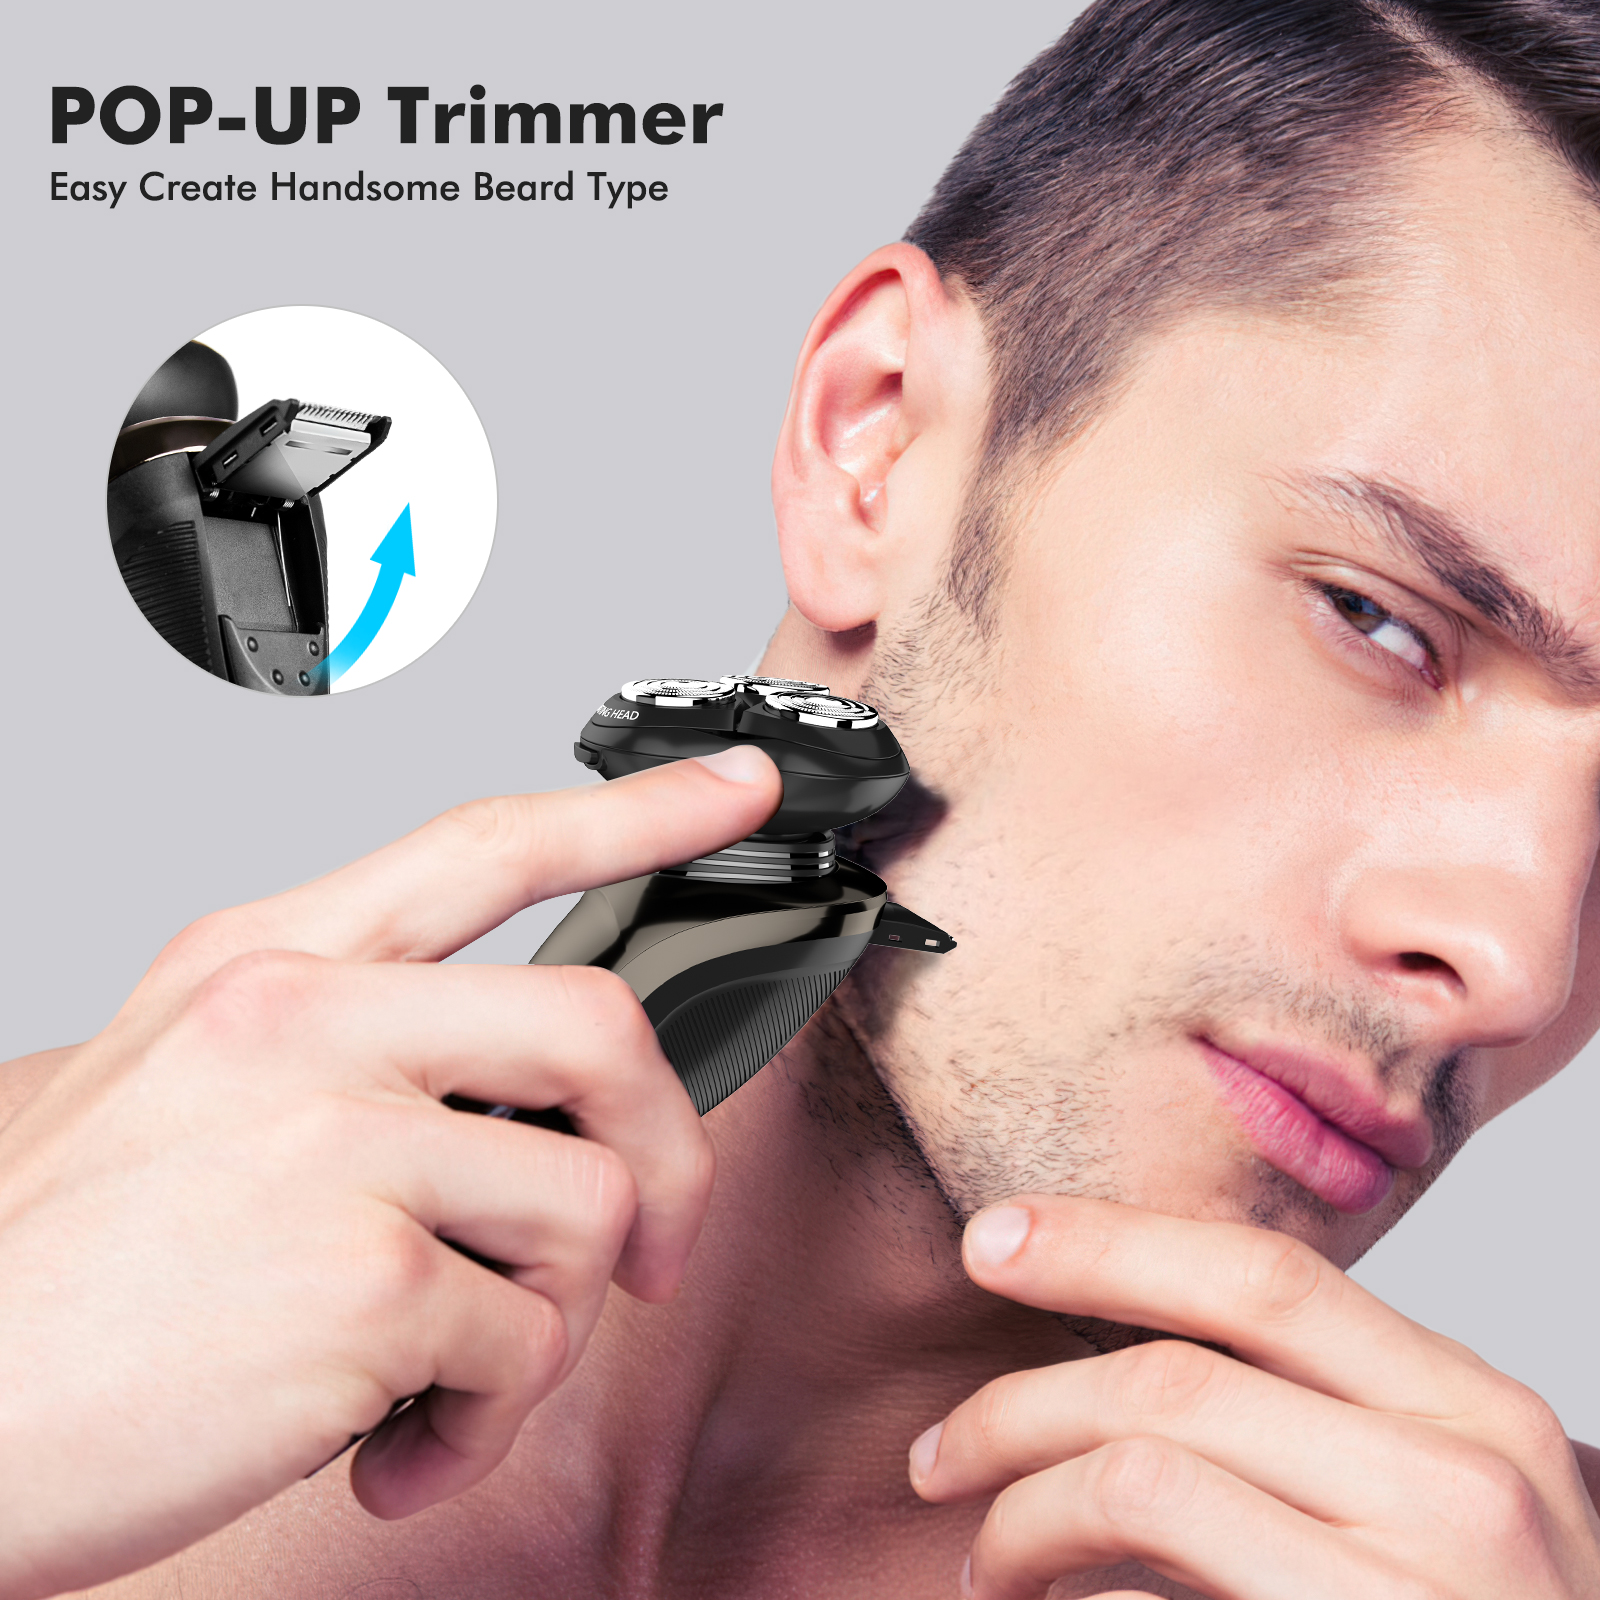 MOOSOO Electric Shaver with Clean Station, Wet Dry Waterproof Electric Razors for Men, Shaver with Pop-up Trimmer - image 3 of 9